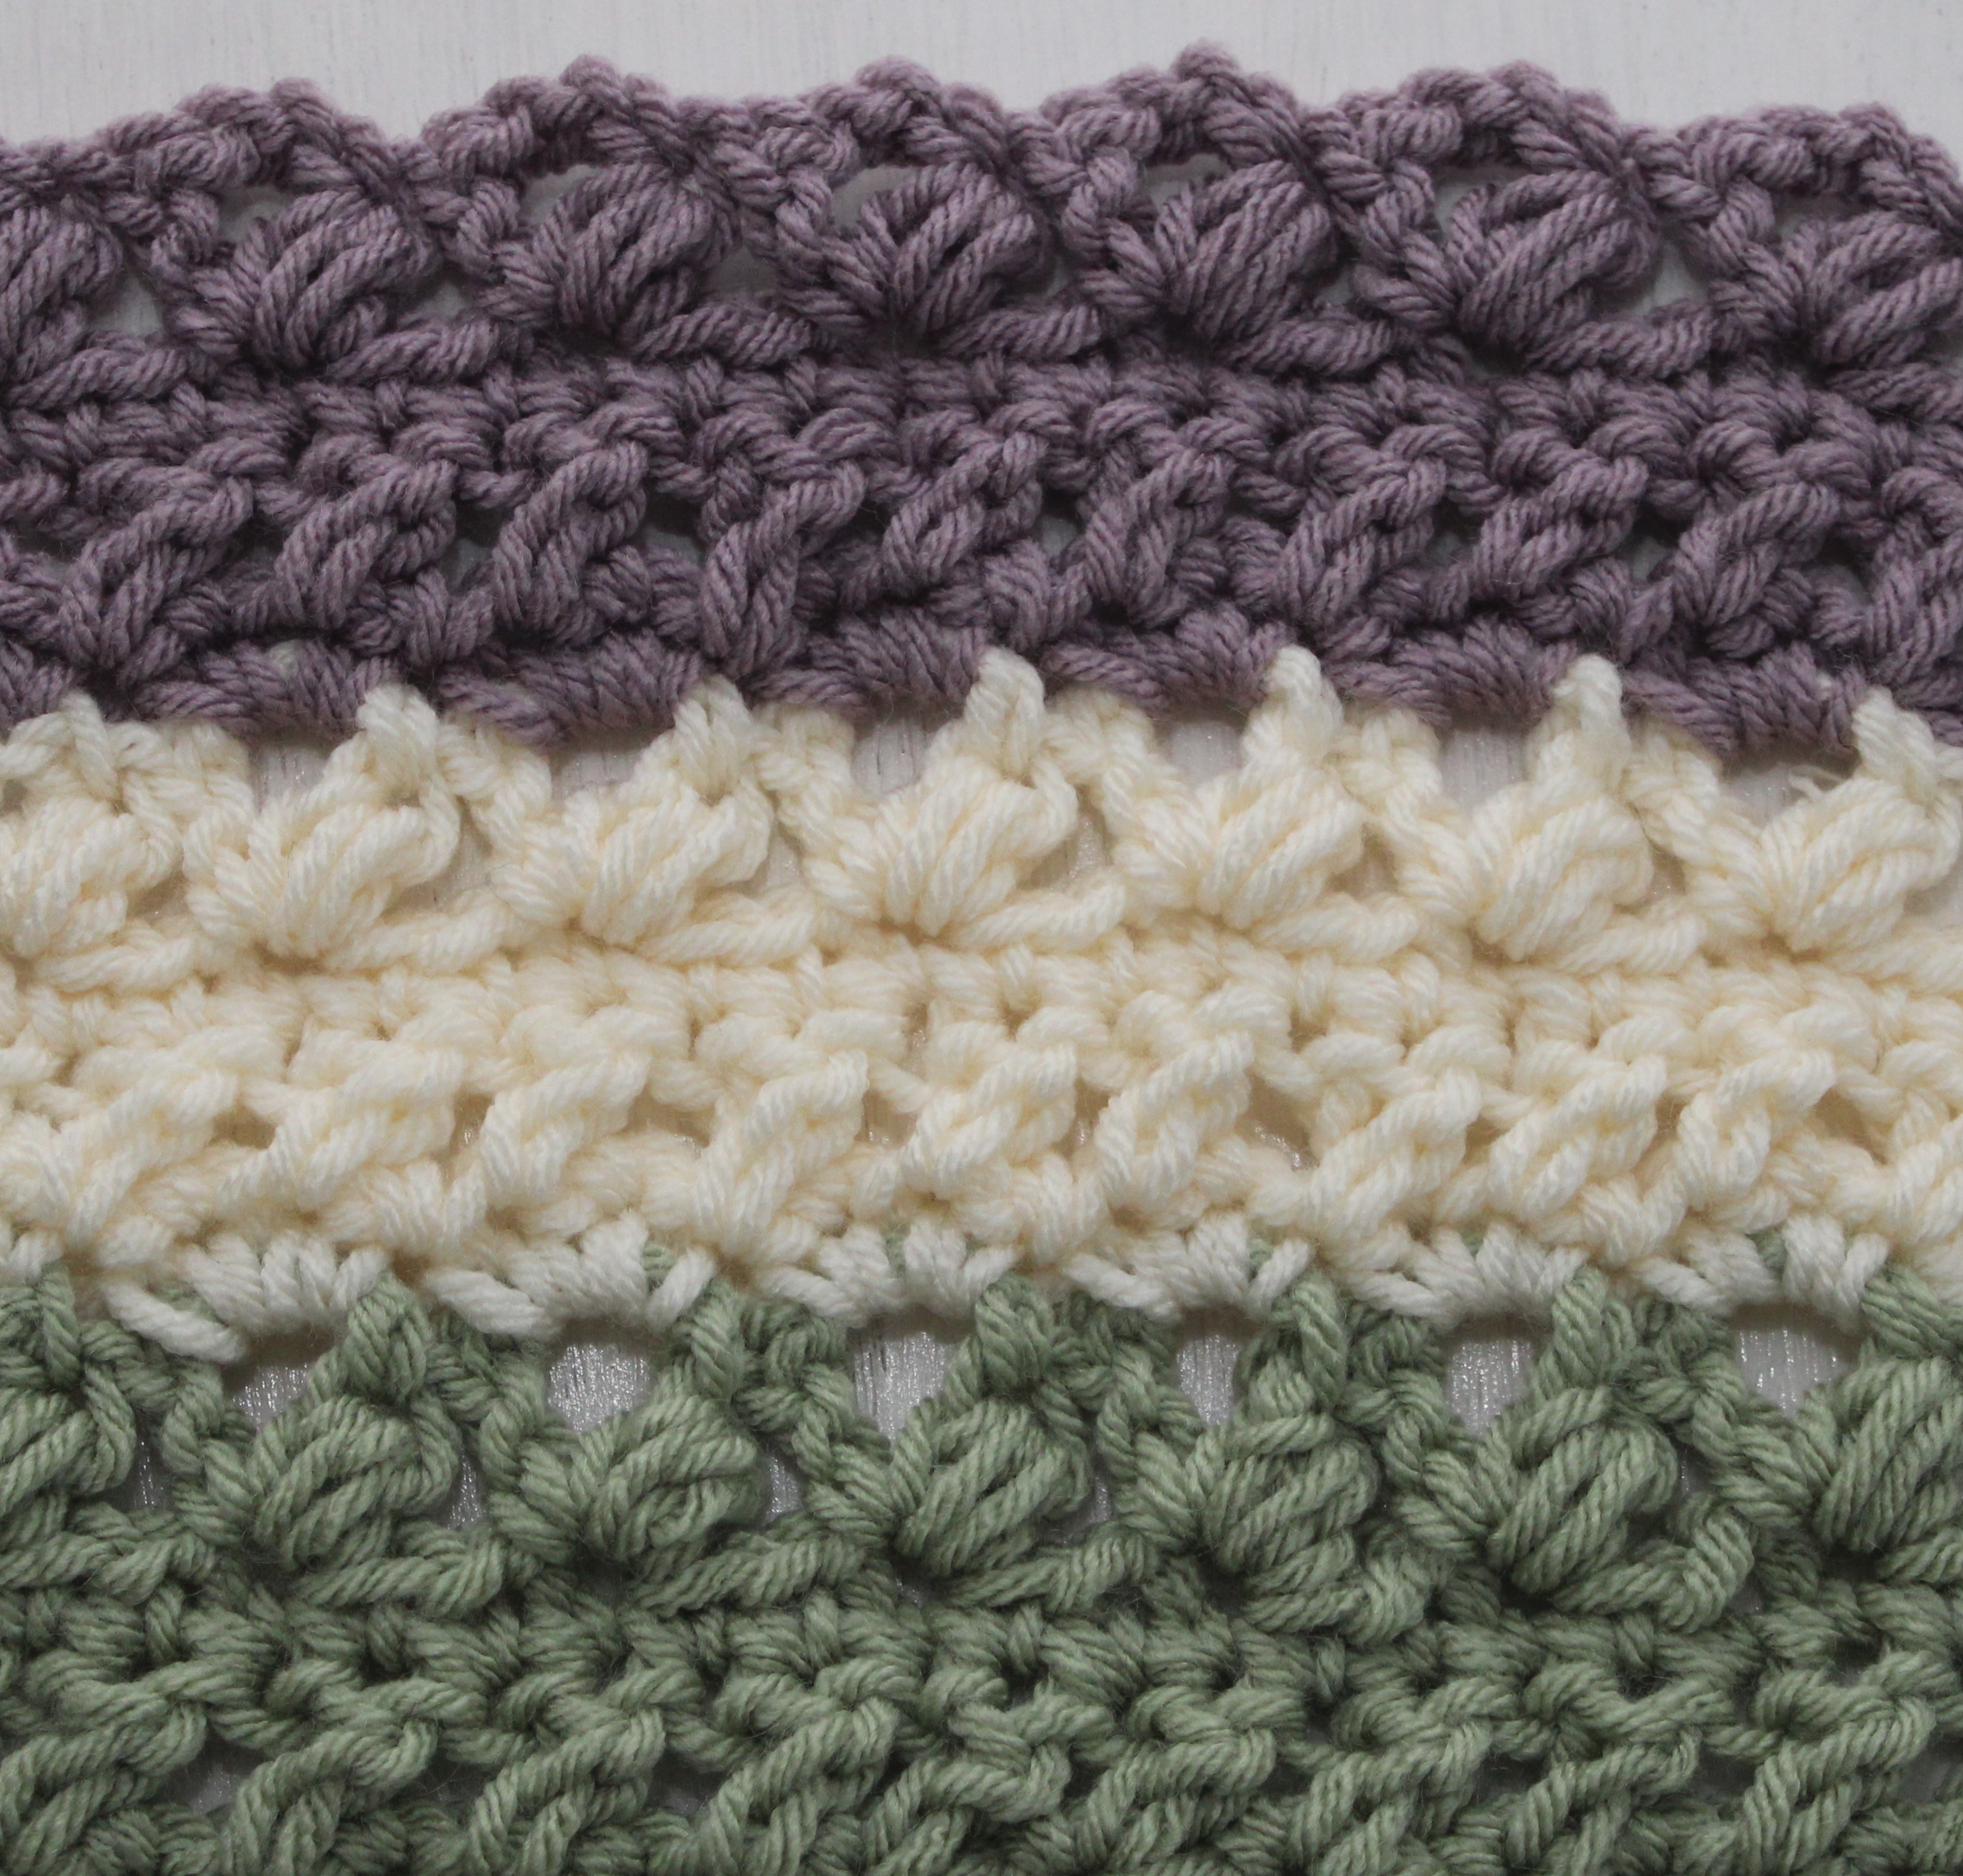 purple, gree, and ivory crocheted swatch